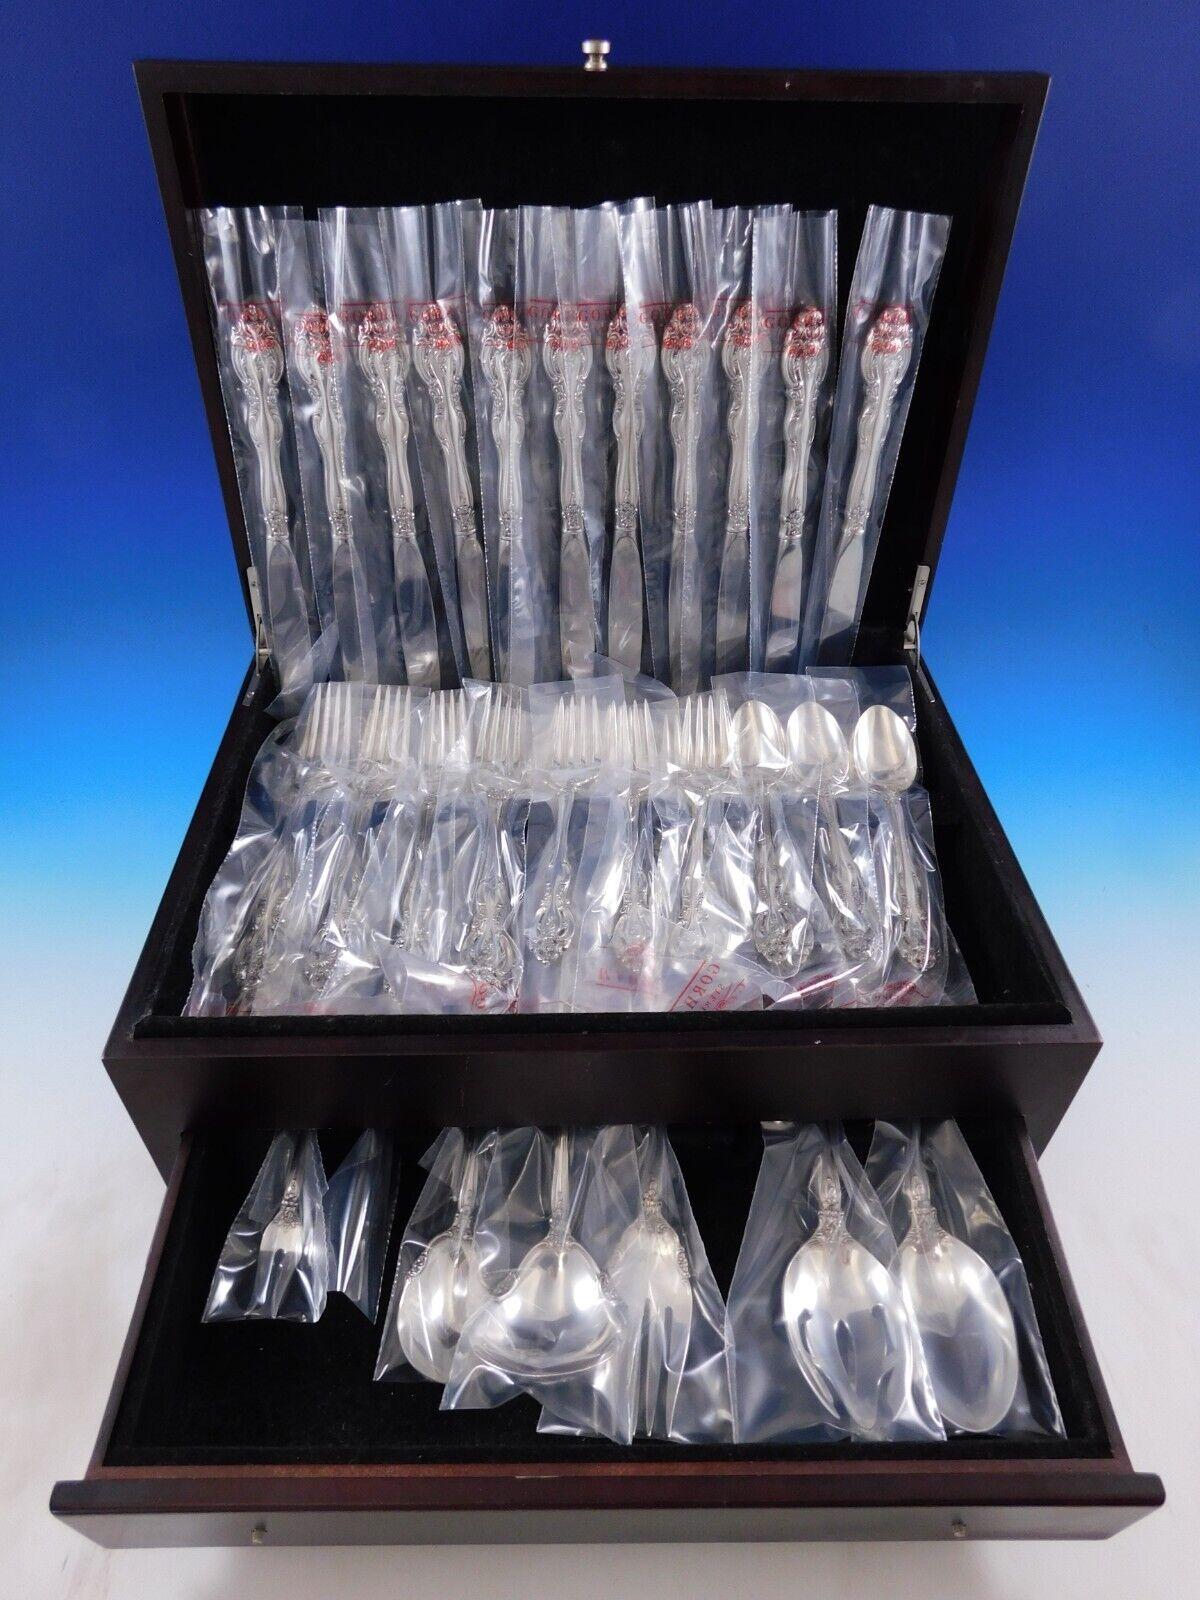 Unused La Scala by Gorham sterling silver flatware set - 54 pieces. This set includes:

12 Knives, 9 1/8